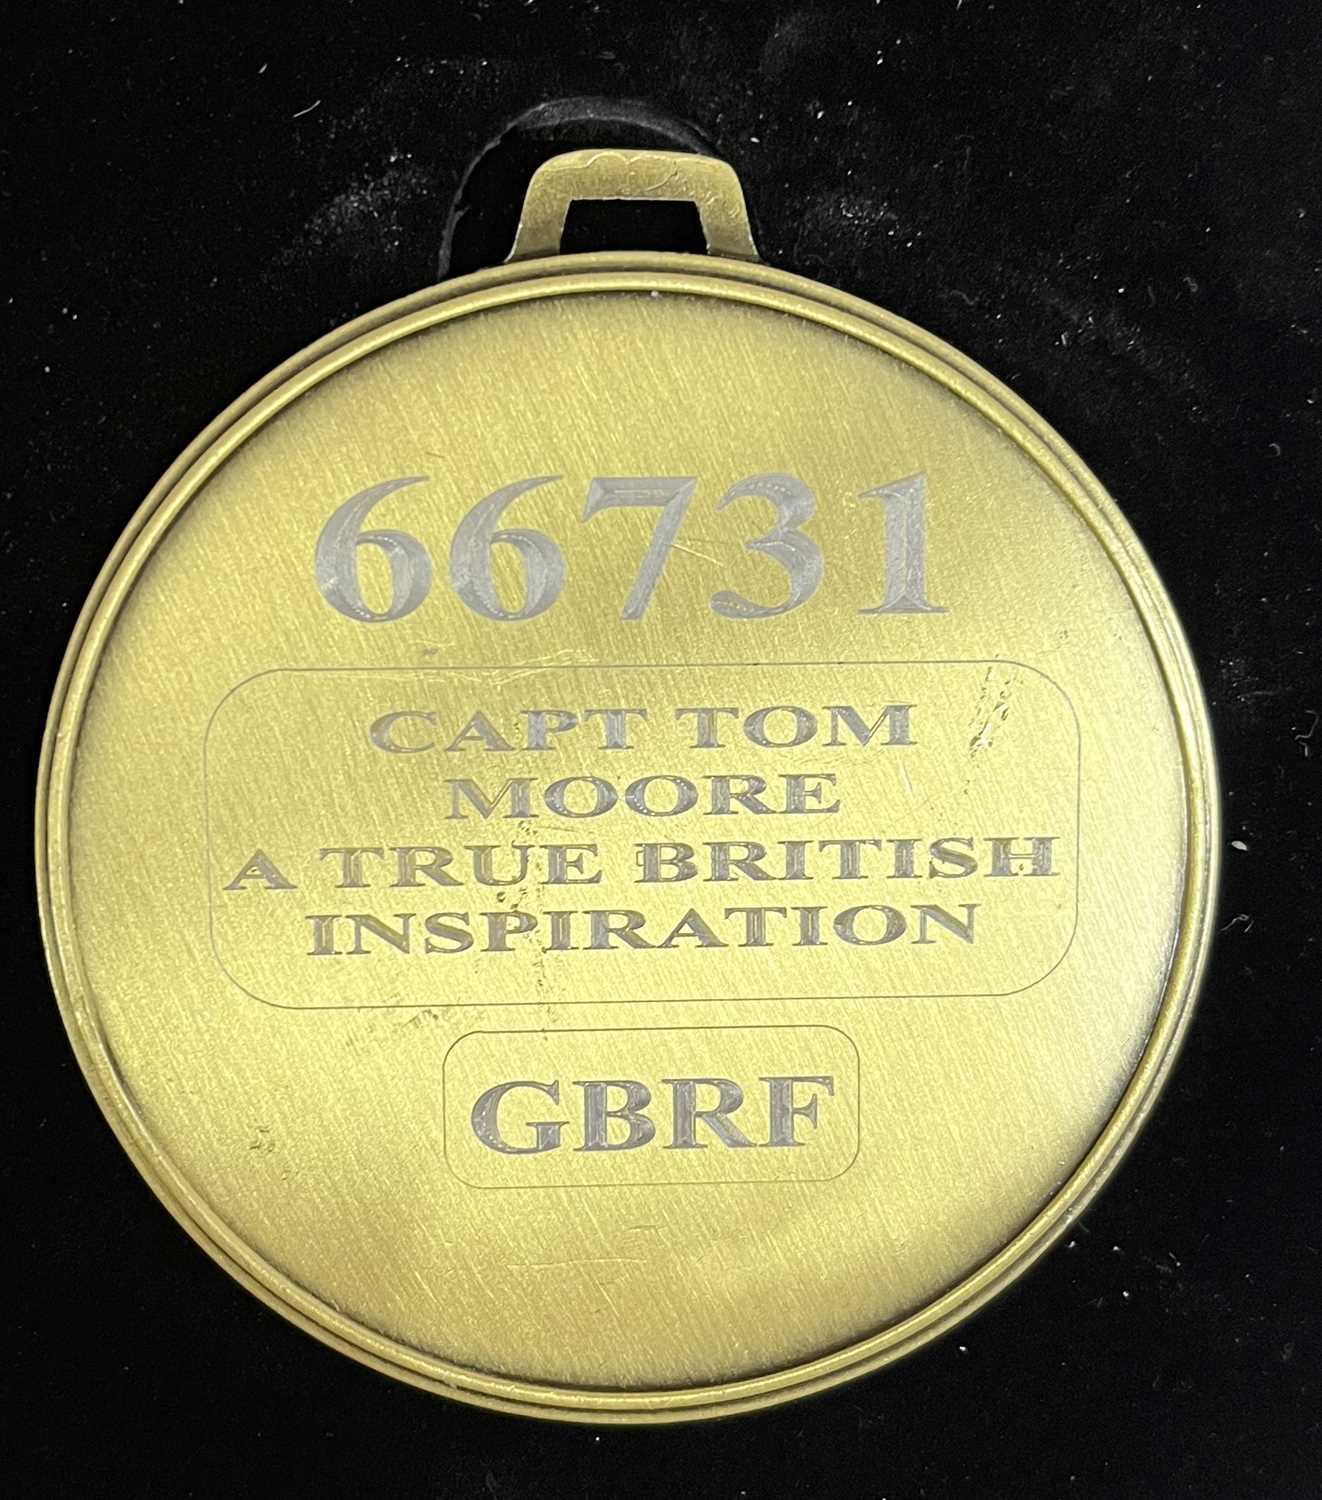 A commemorative gold award medal to GBRF 66731 Captain Tom Moore: True British Inspiration - Image 2 of 2